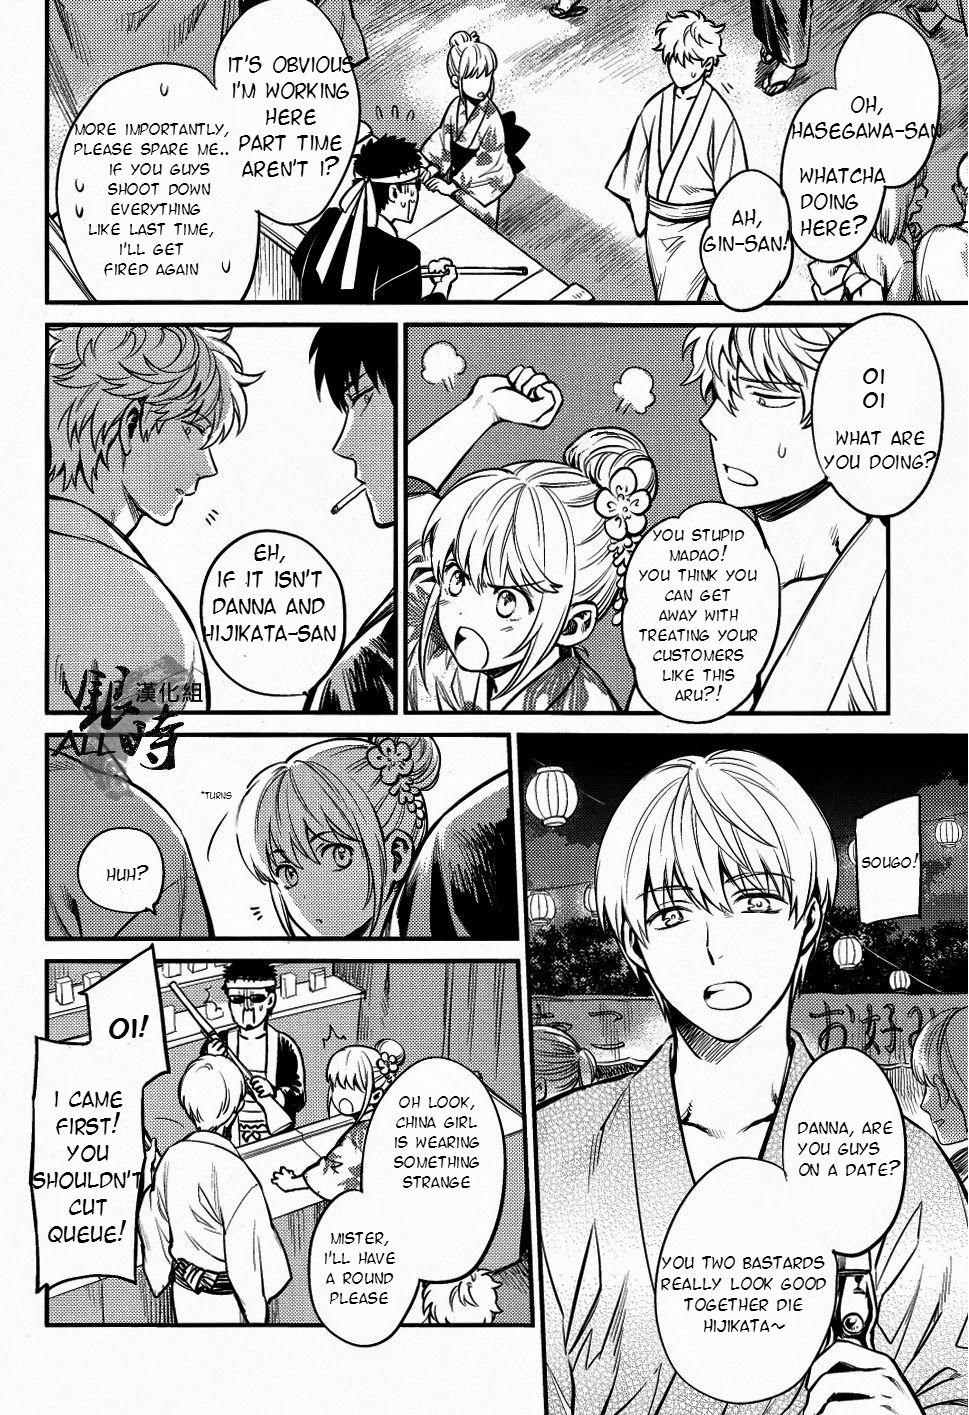 Swinger Please! Gintoki - Gintama And - Page 11